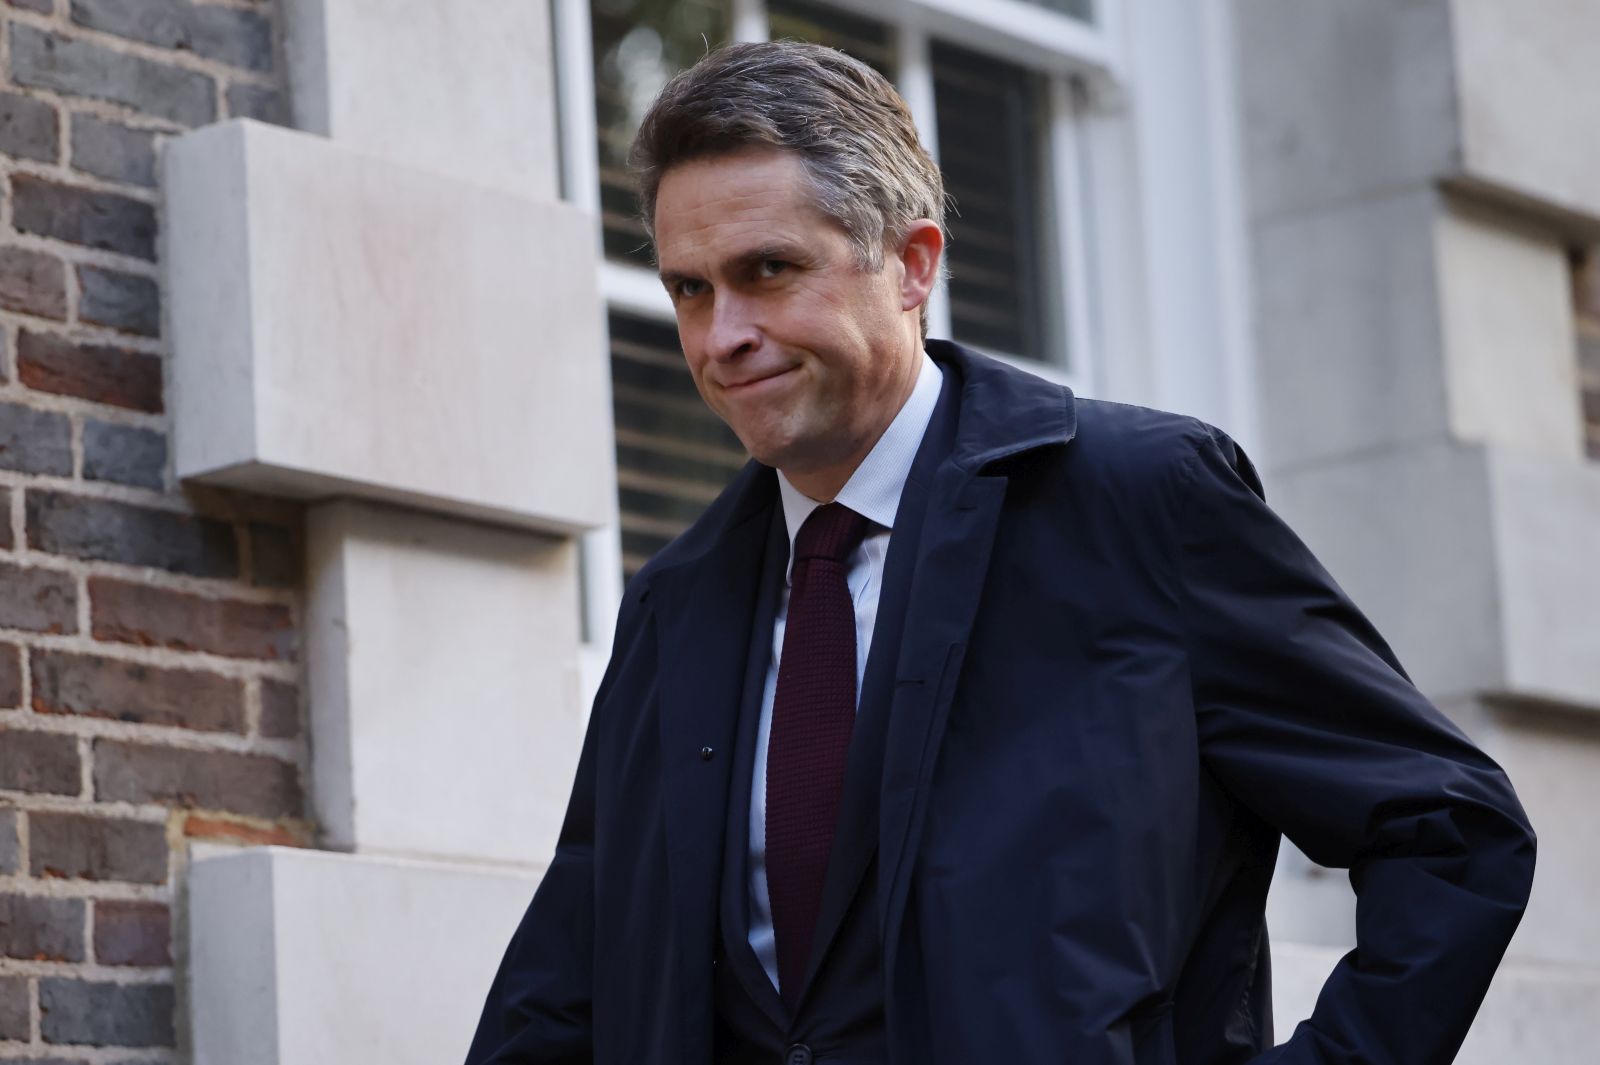 epa10294801 (FILE) - British MP Gavin Williamson arrives at Sunak's office in London, Britain, 24 October 2022 (reissued 08 November 2022). Gavin Williamson on 08 November 2022 announced his resignation as Minister of State without Portfolio over "an ongoing complaints process regarding text messages" and allegations of bullying.  EPA/TOLGA AKMEN